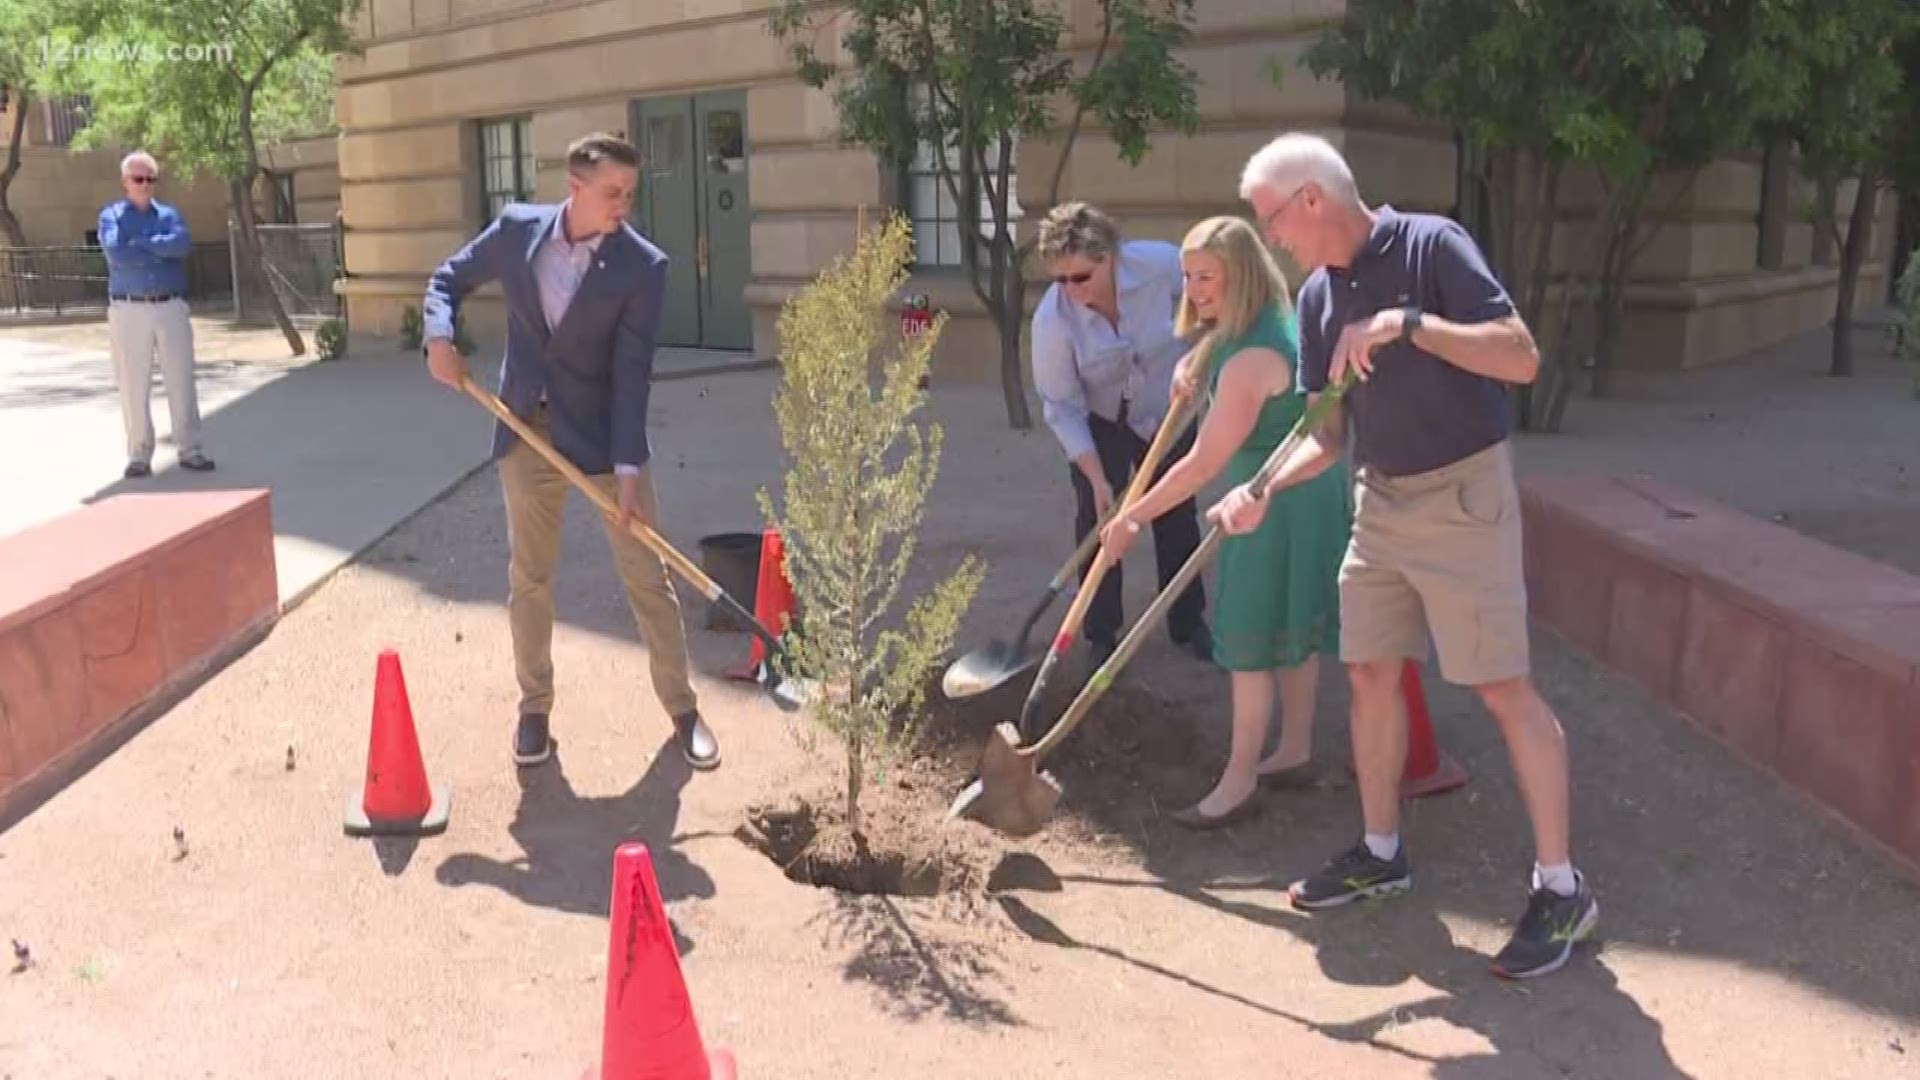 Mayor Kate Gallego planted a tree for Earth Day in downtown Phoenix Monday. Planting a tree can alleviate the heat island effect that is common in Phoenix, it creates shade and provides cleaner air for the city.